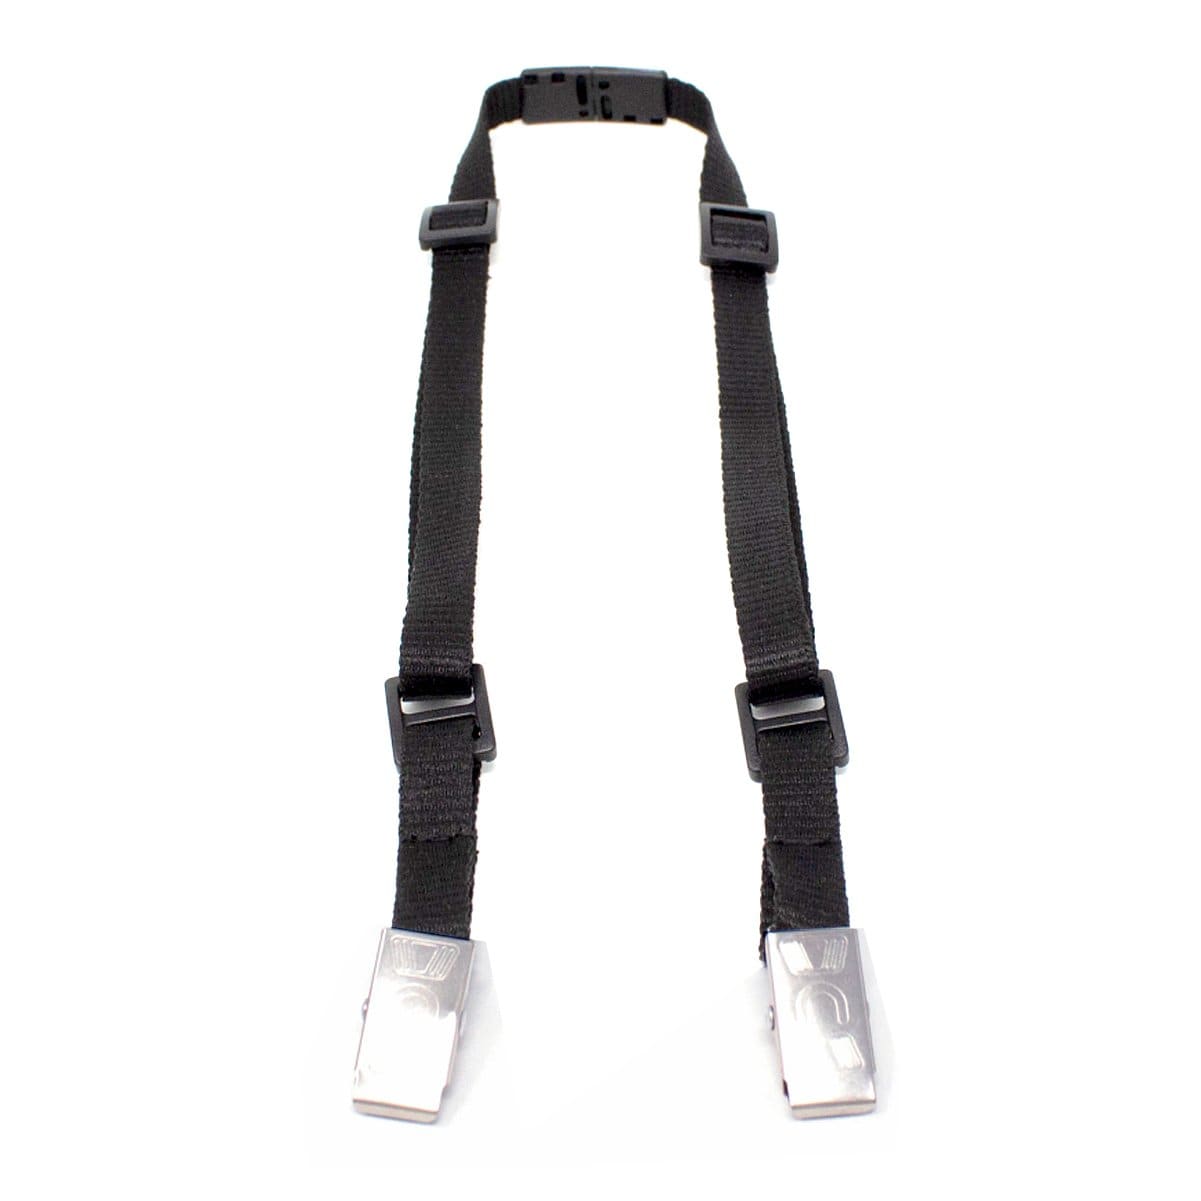 Black Adjustable Length Face Mask Lanyards with Safety Breakaway Clasp (2140-531X) 2140-5311